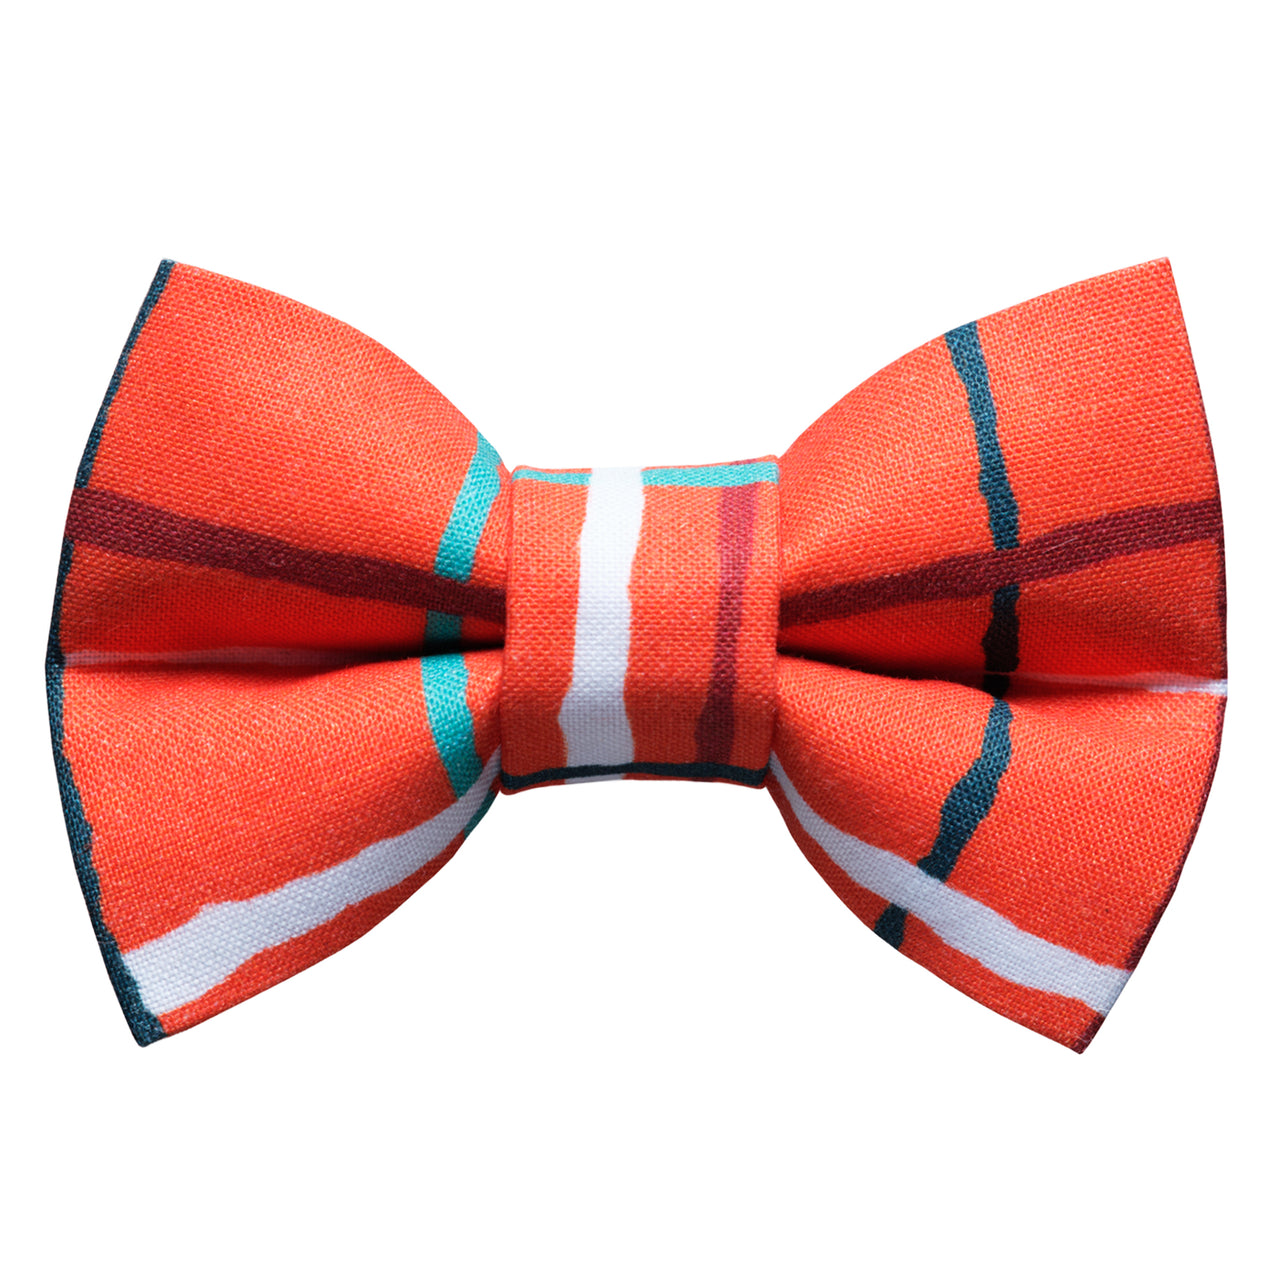 The That's A Wrap - Cat / Dog Bow Tie